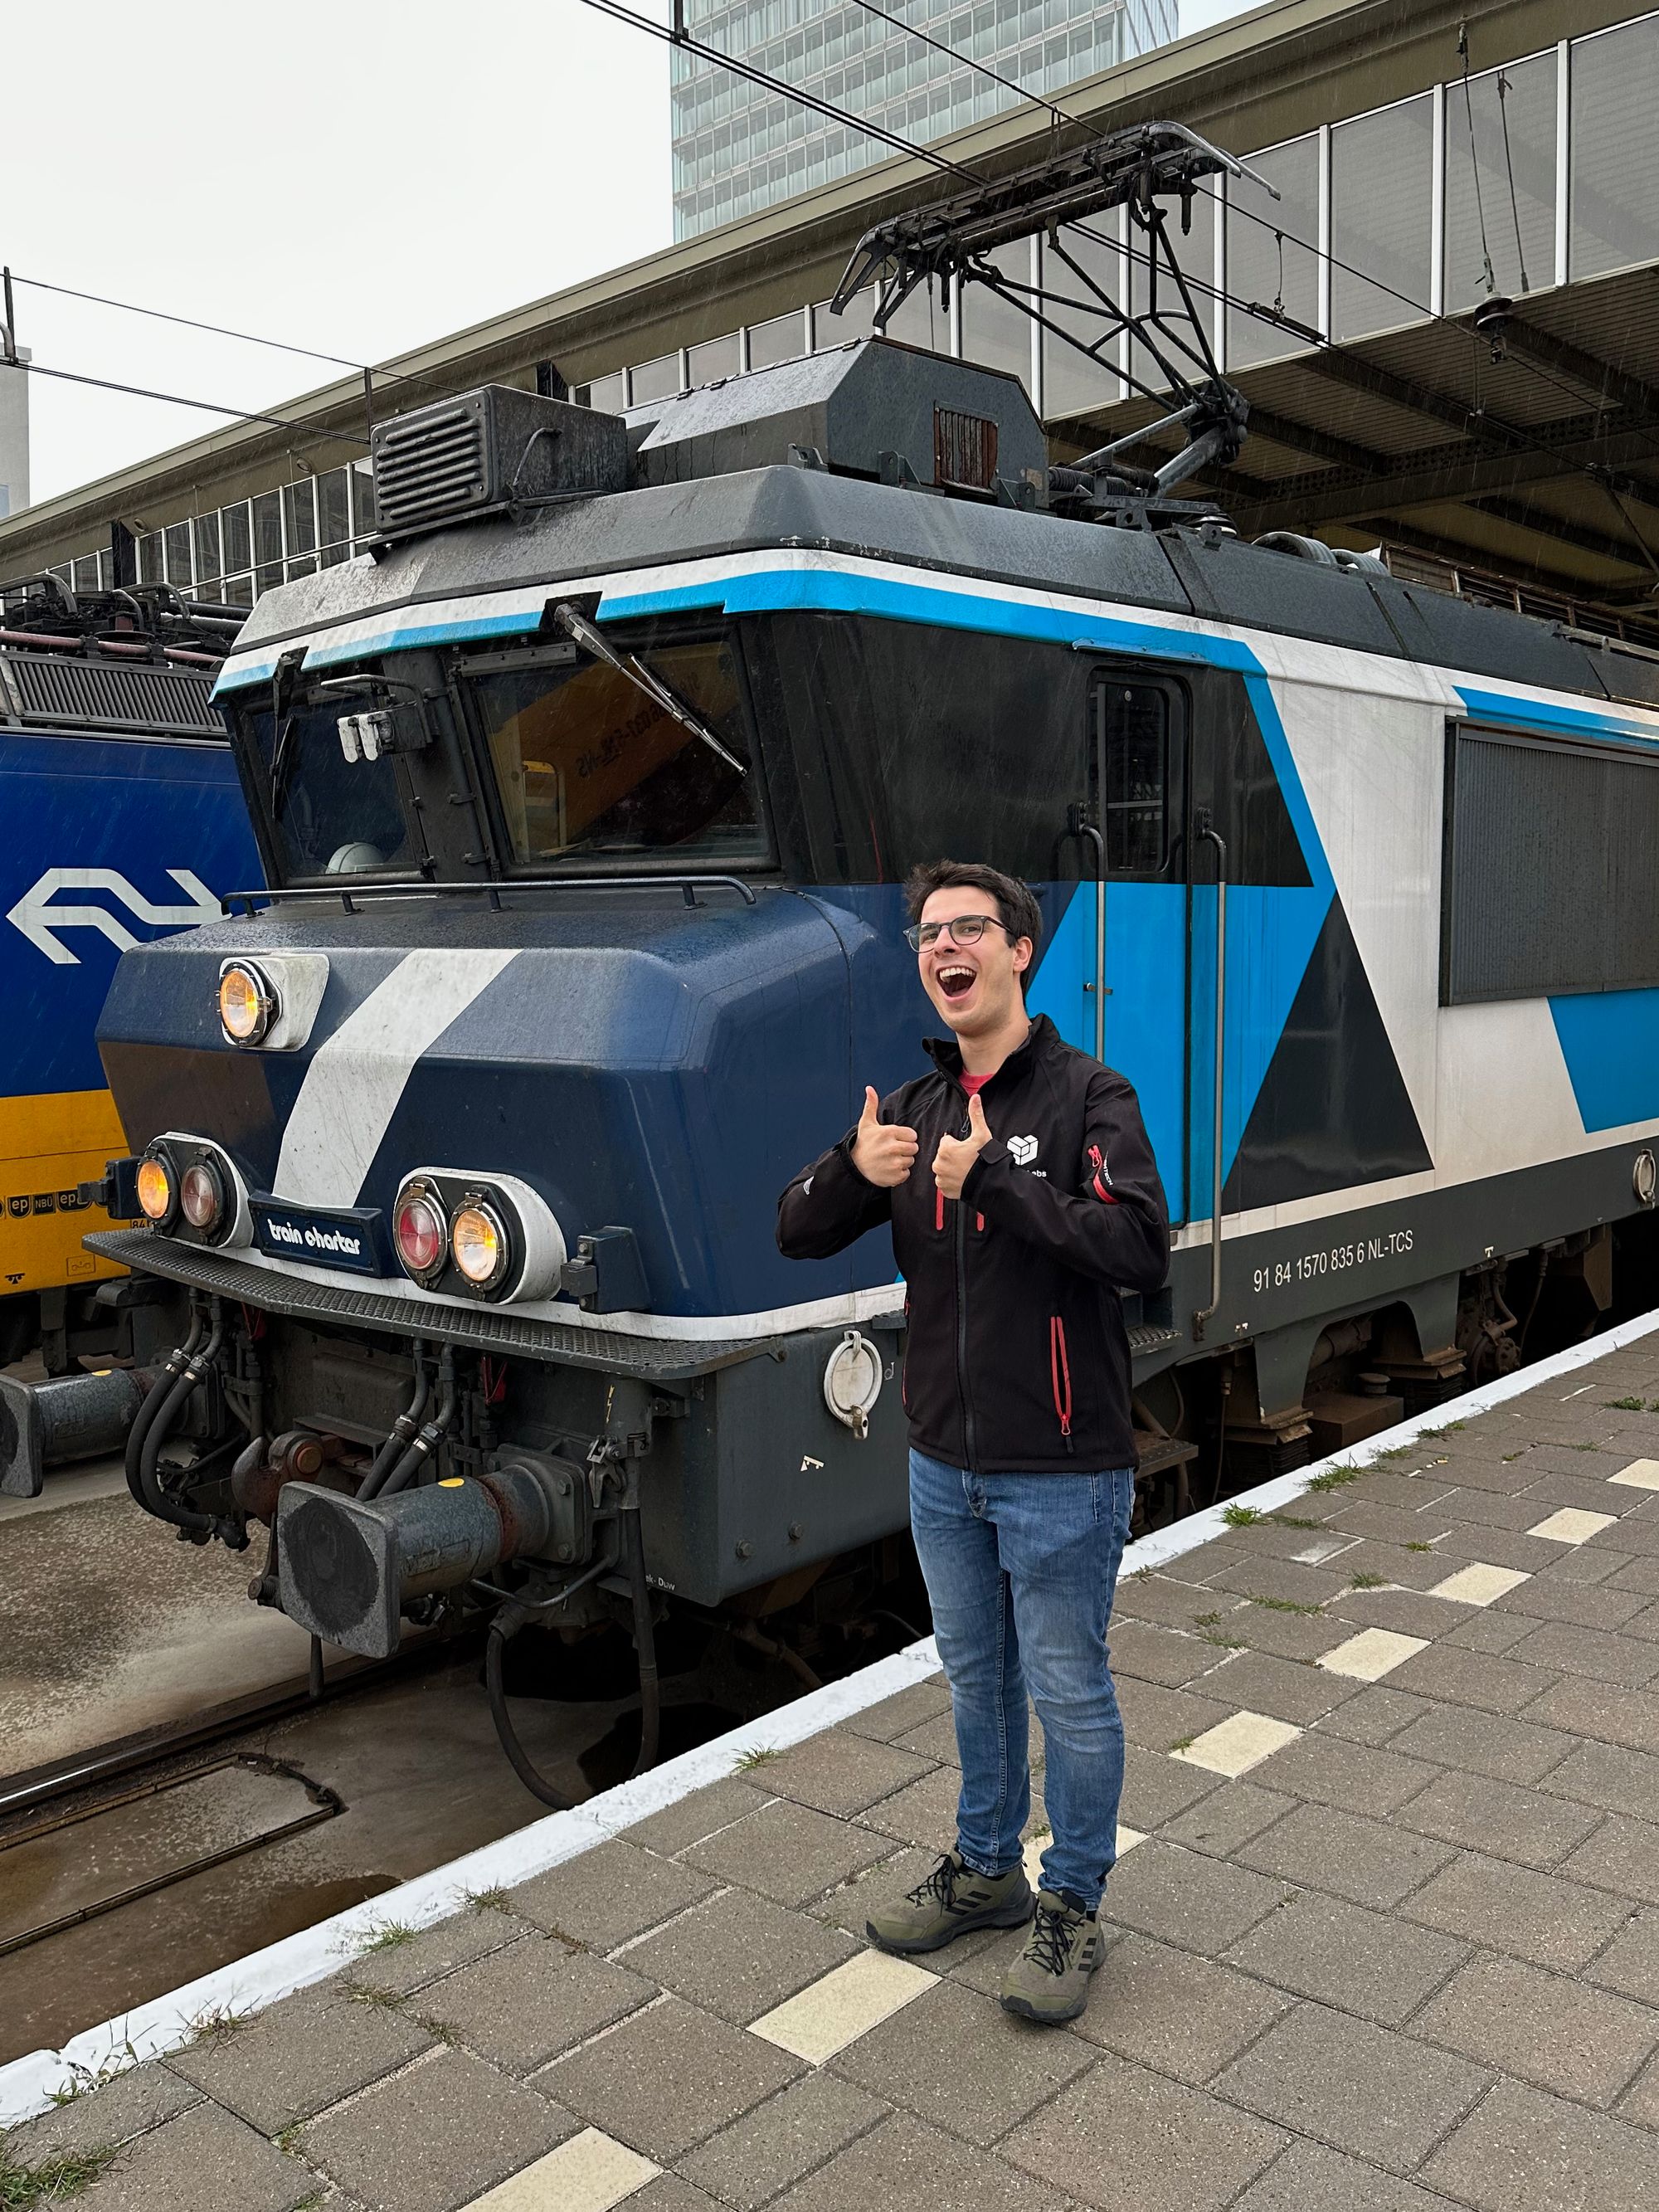 Me, and the Dinner Train Locomotive